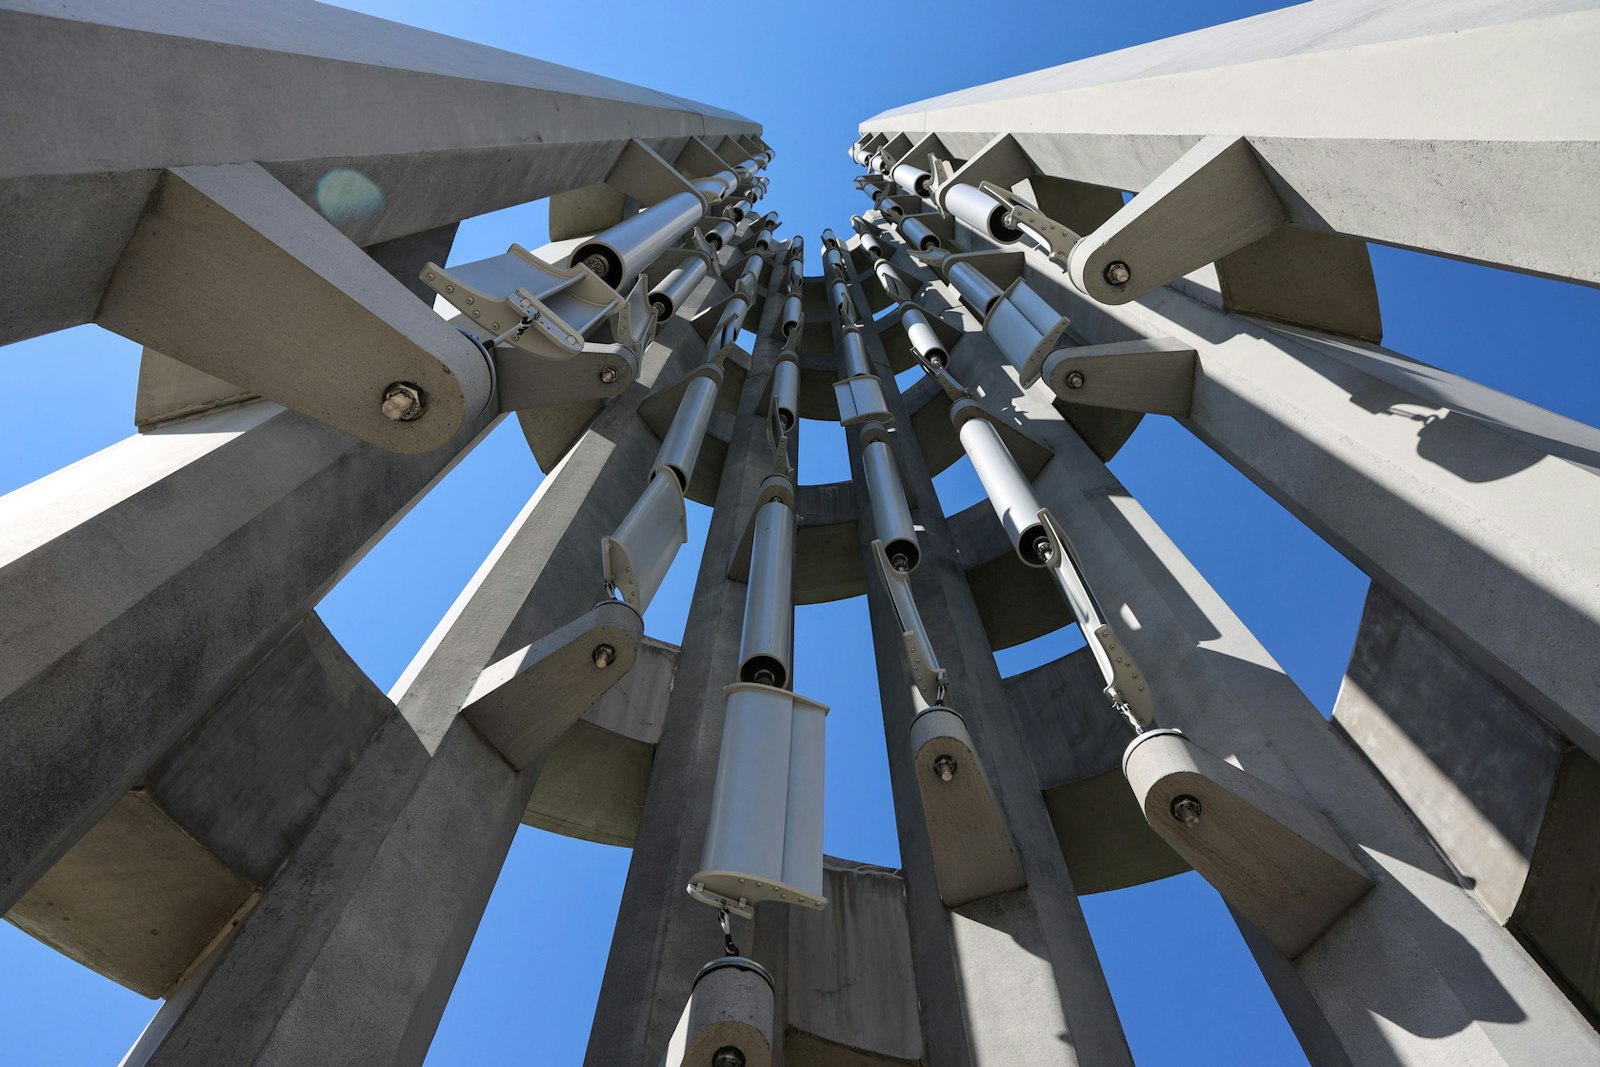 Looking upward, a structure of stone tower walls with large metal bells hung up among them